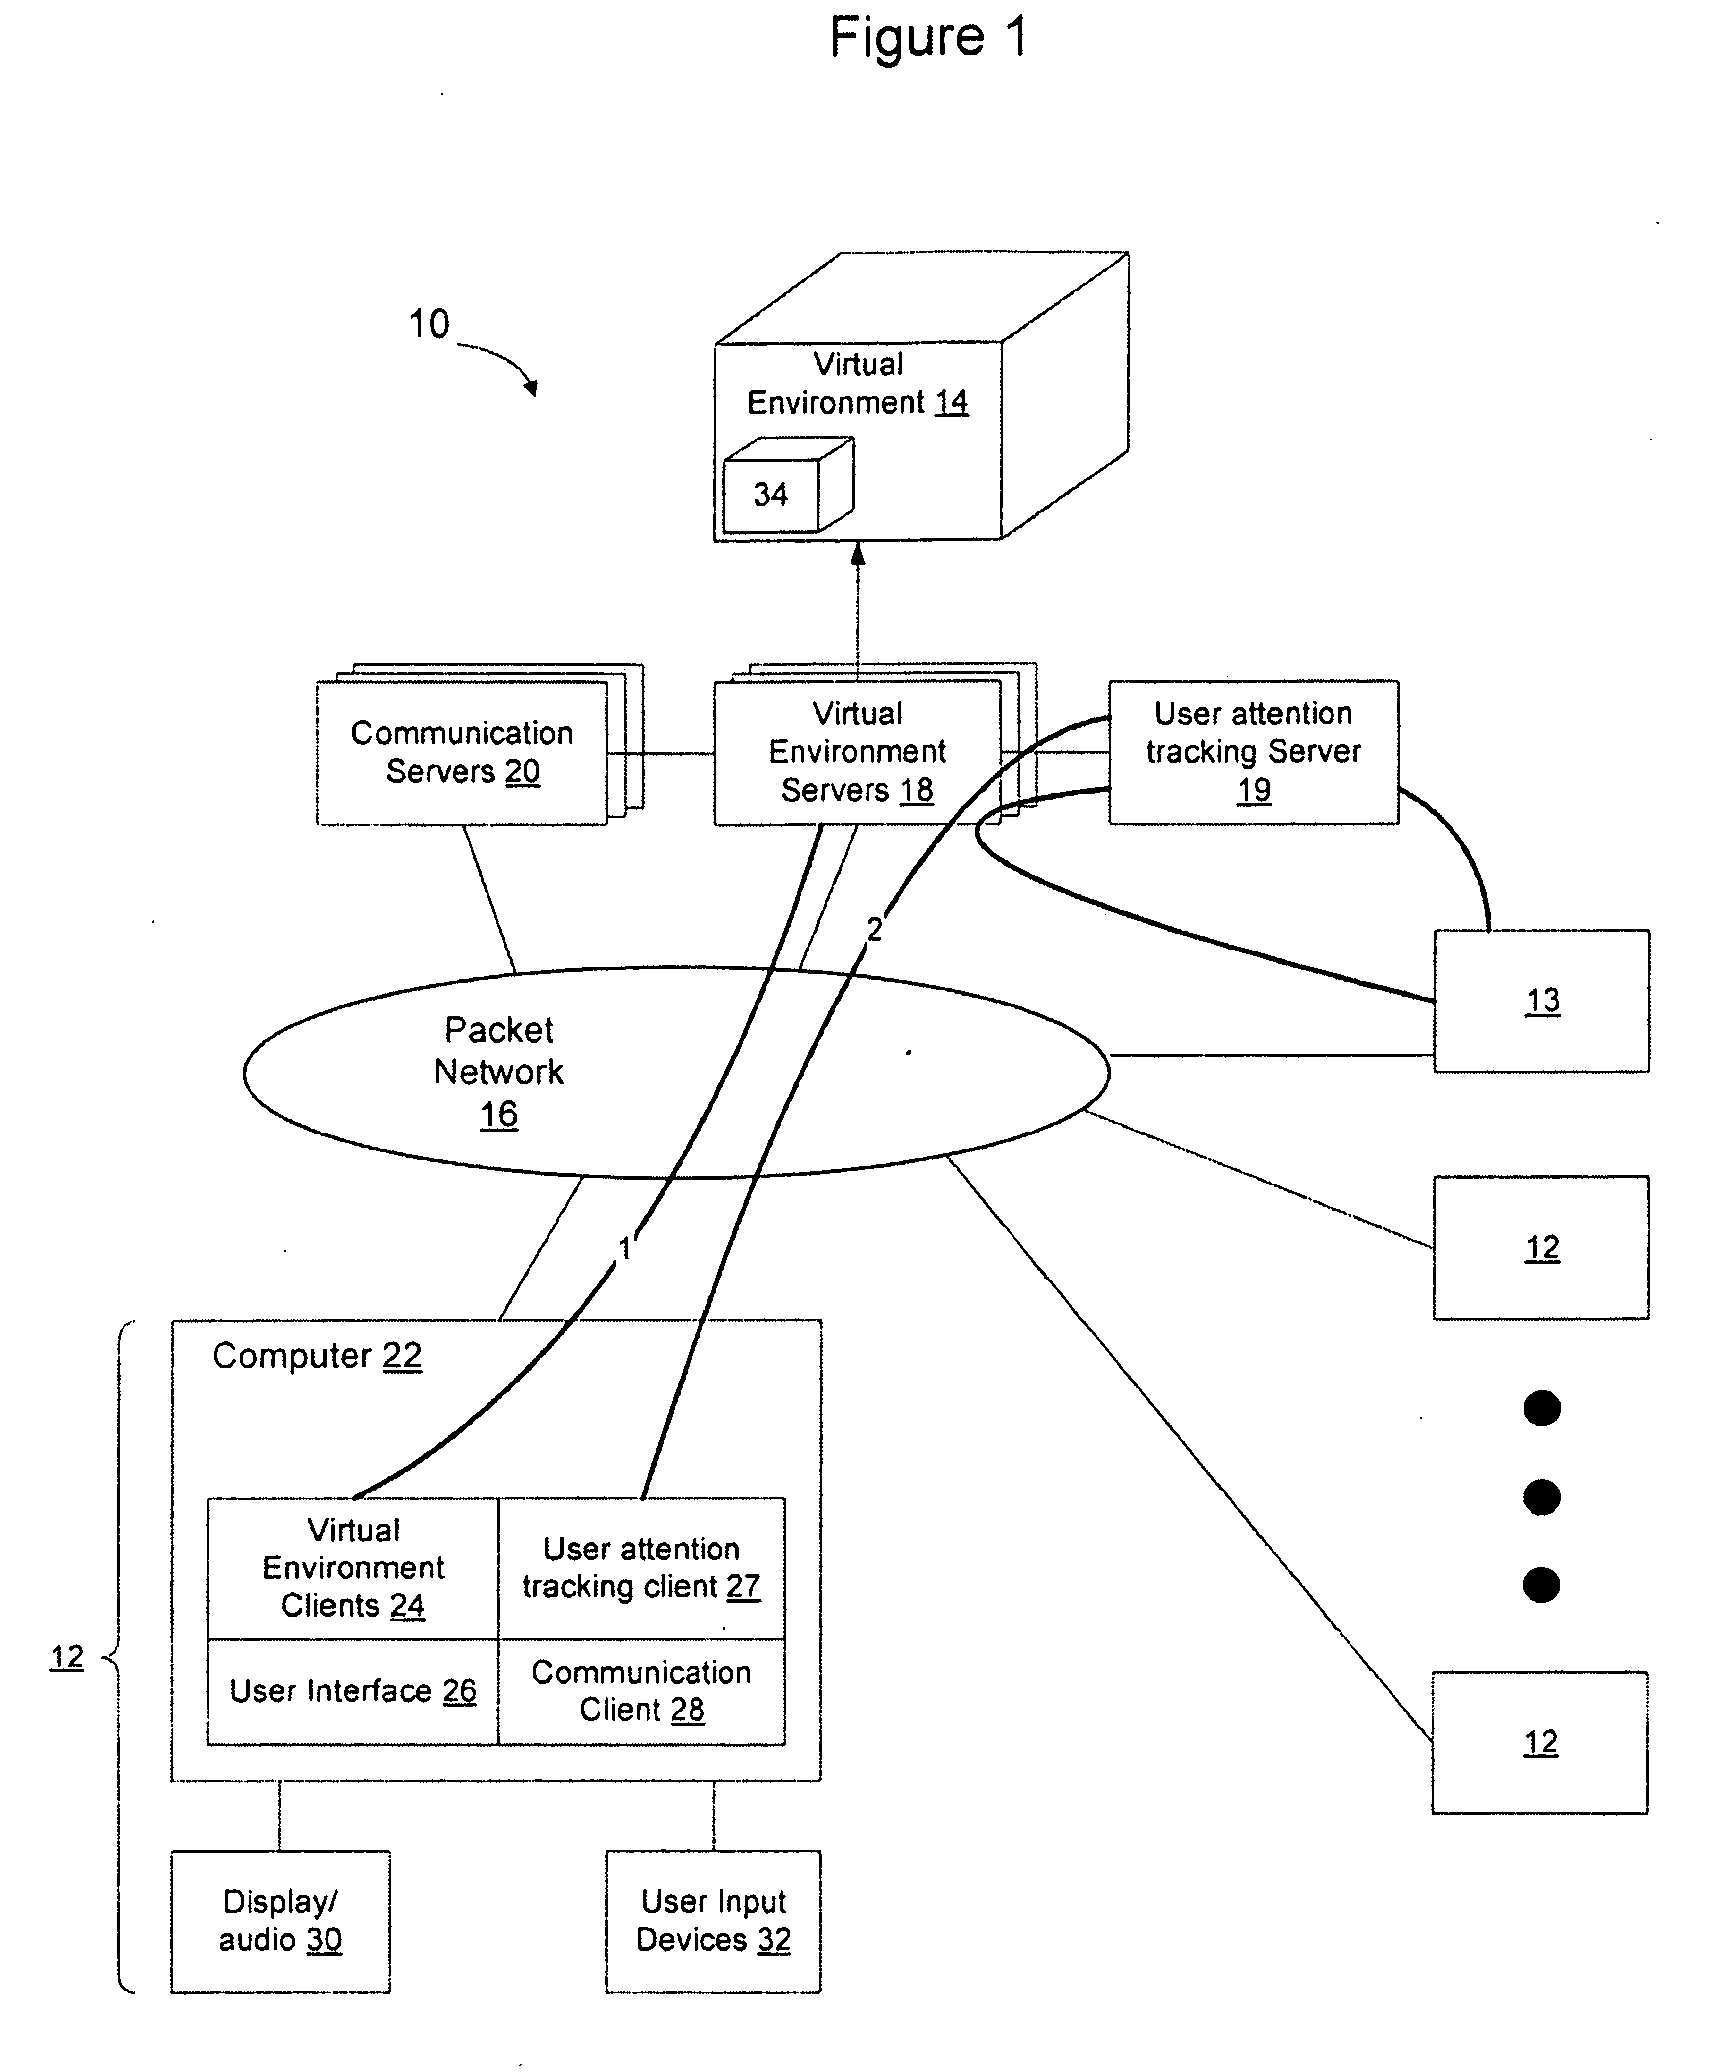 Method and Apparatus for Monitoring User Attention with a Computer-Generated Virtual Environment